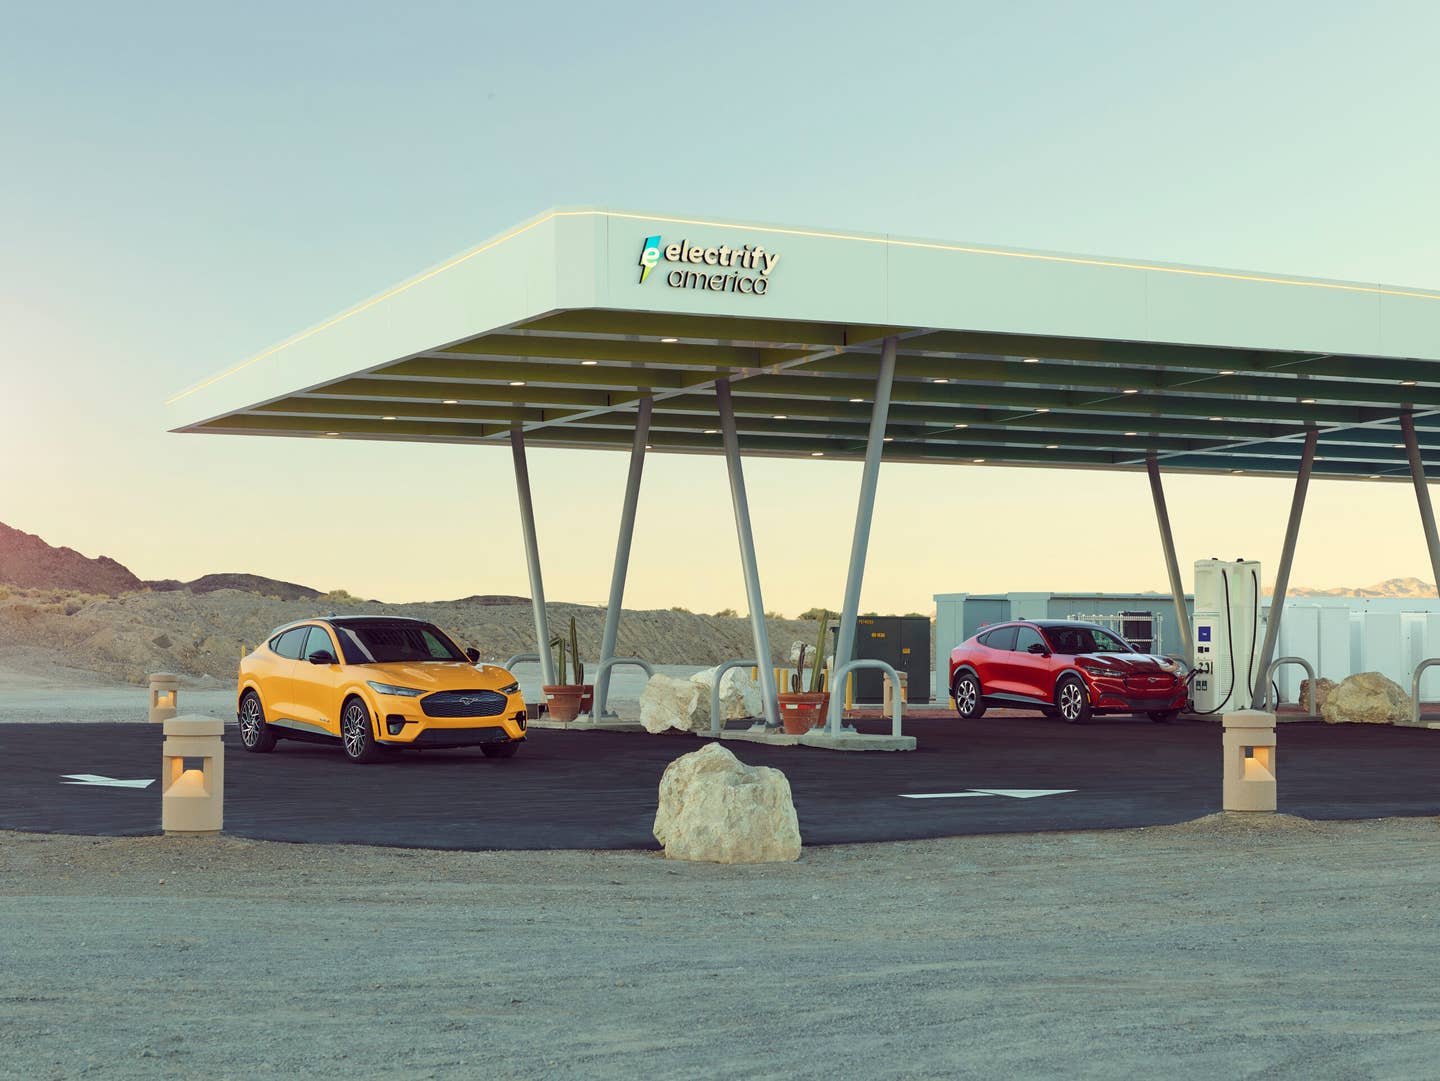 An Electrify America charging station in Baker, California.